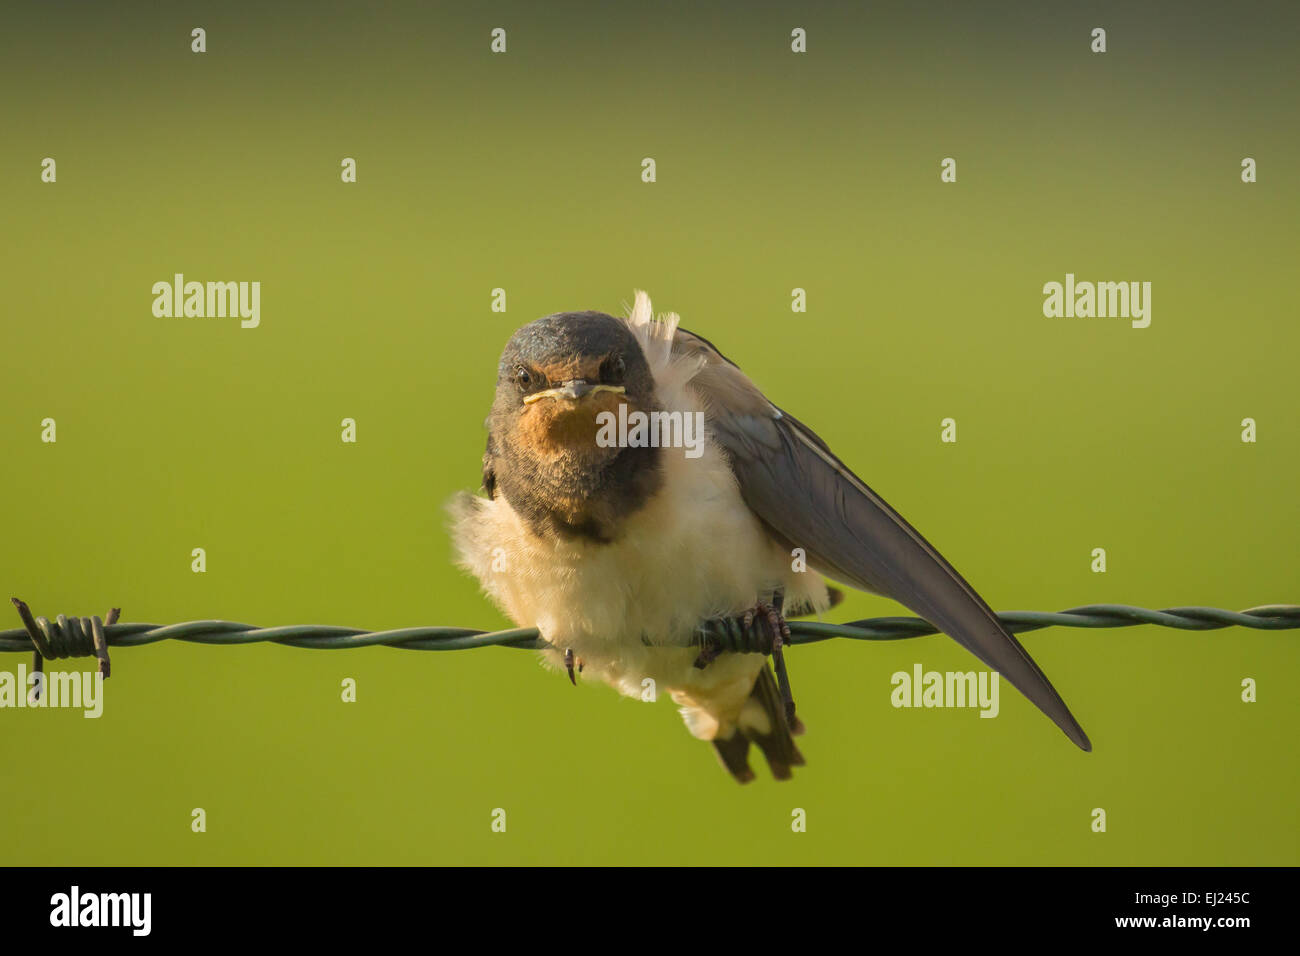 Barn Swallow (Hirundo rustica) spreads his wings while resting on green barb wire during a early morning sunrise Stock Photo